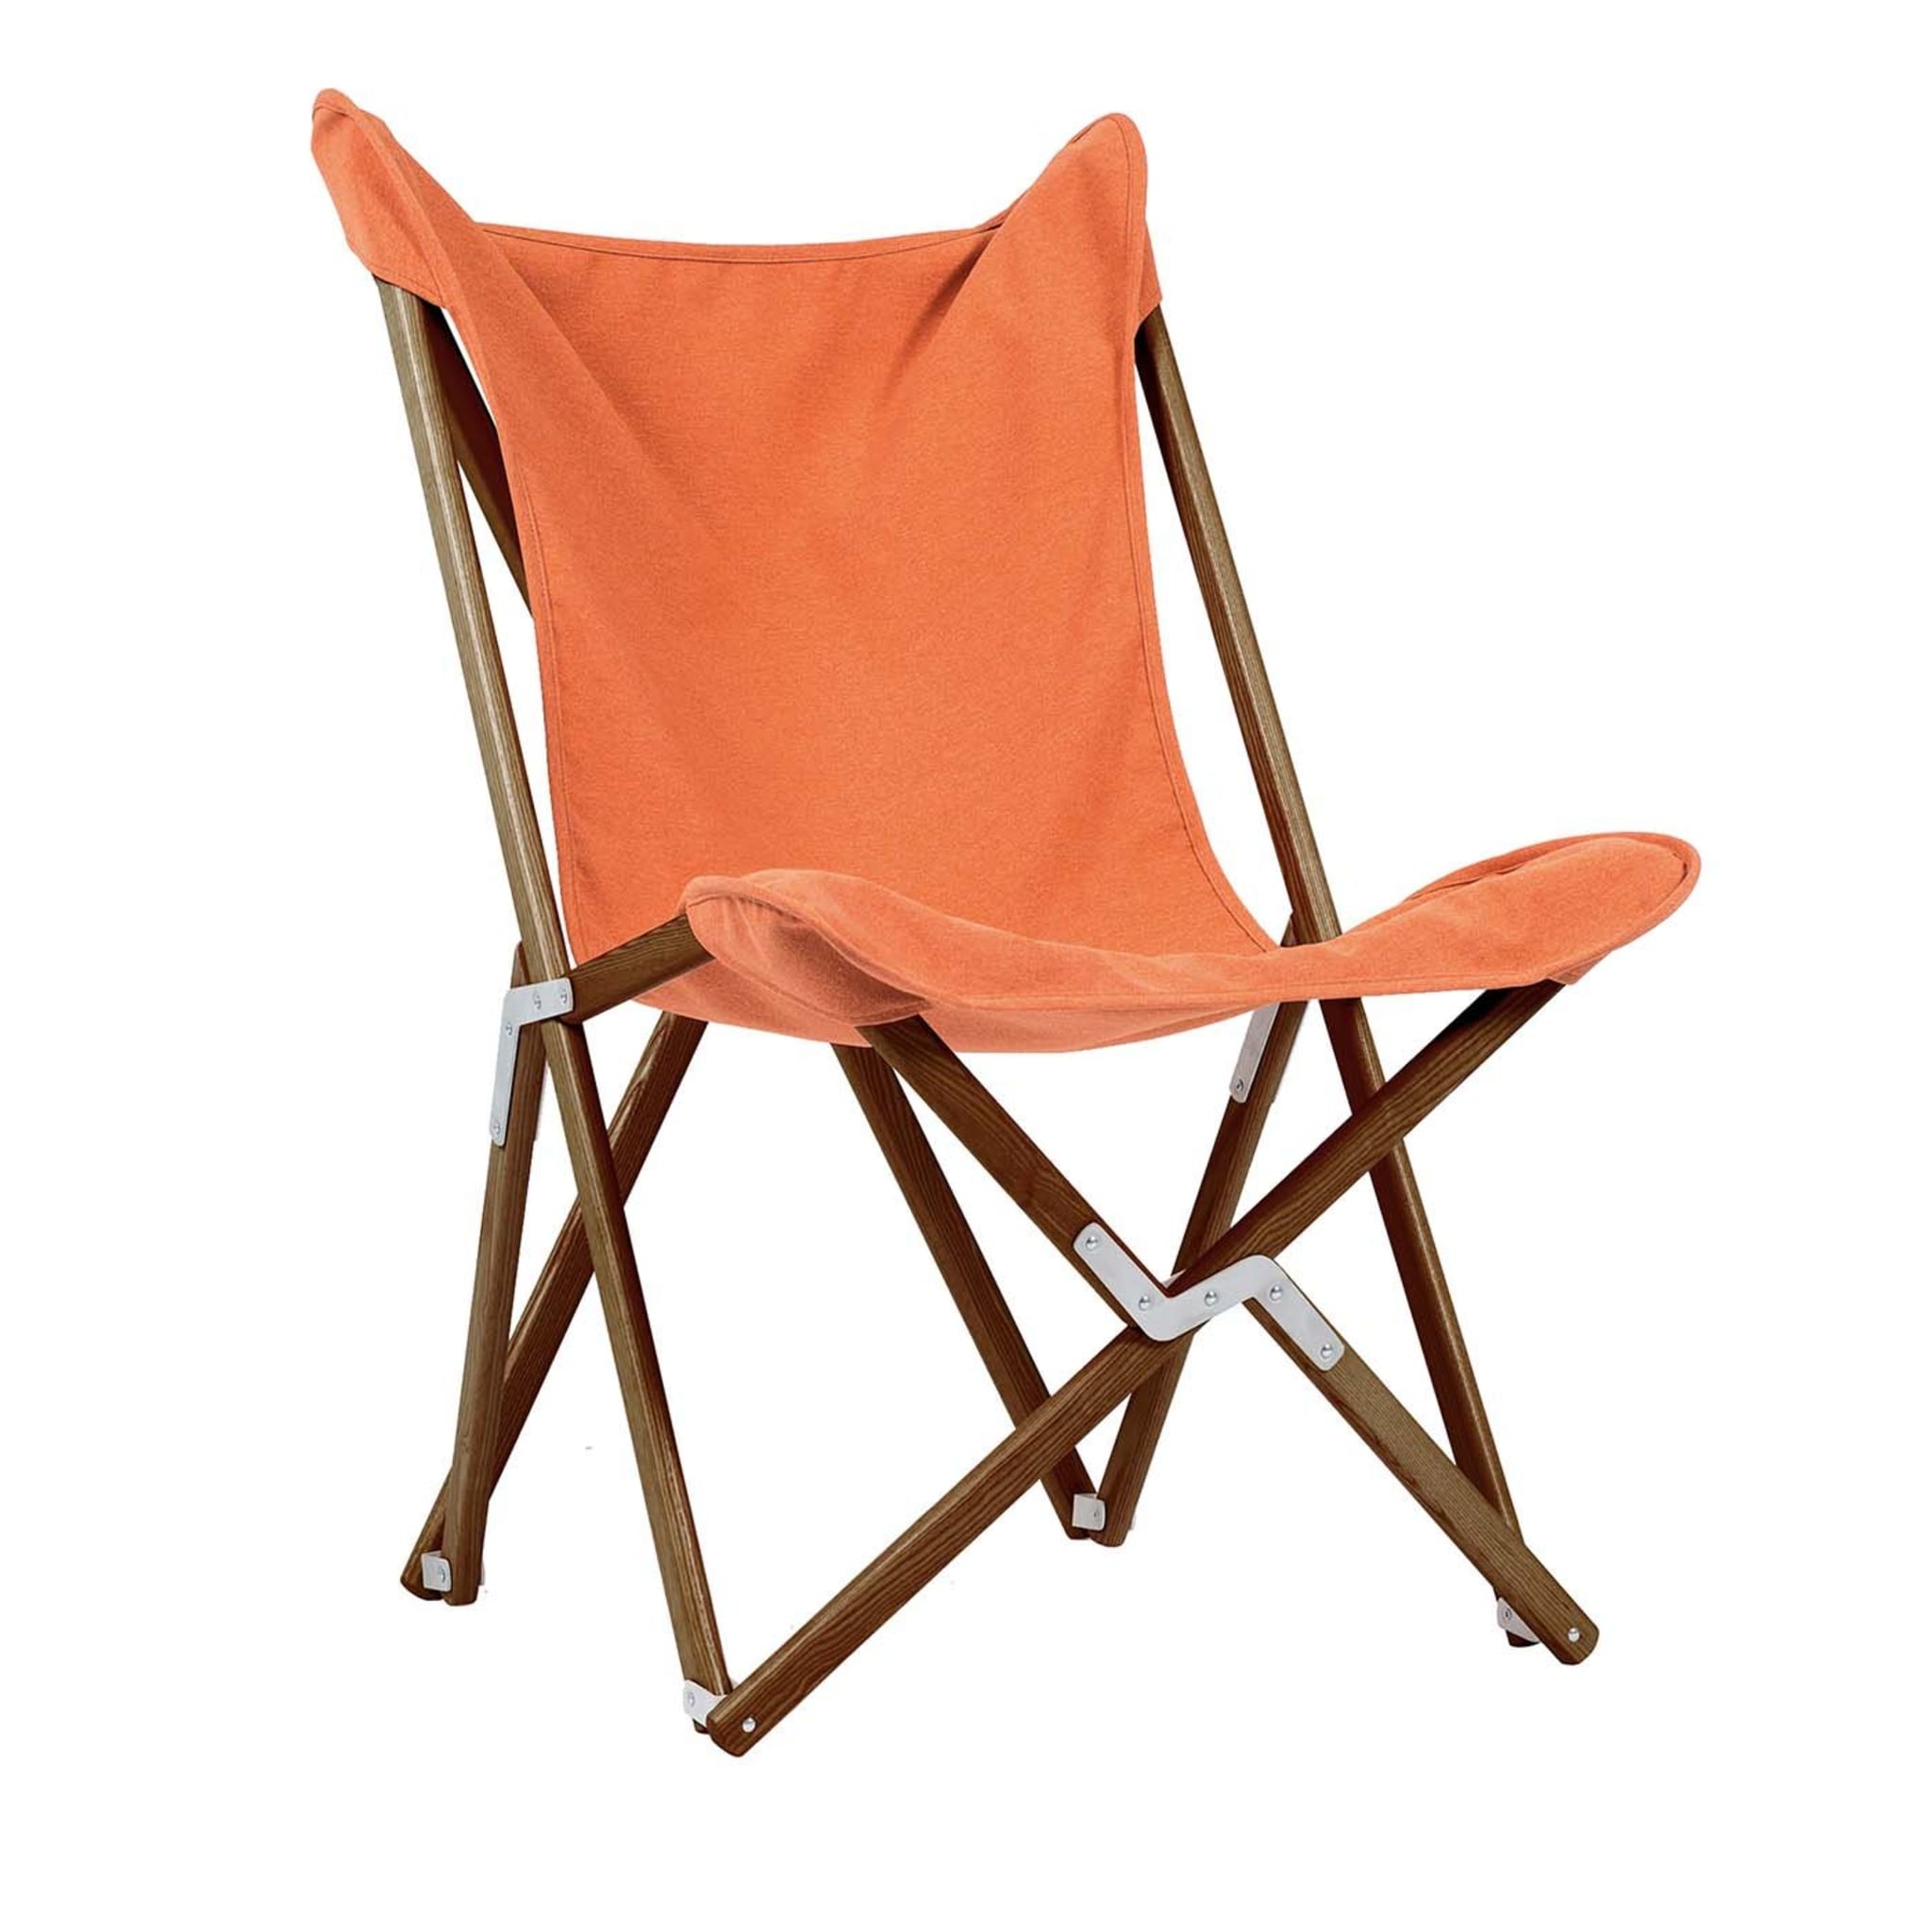 Tripolina Chair in Terracotta Red - Main view